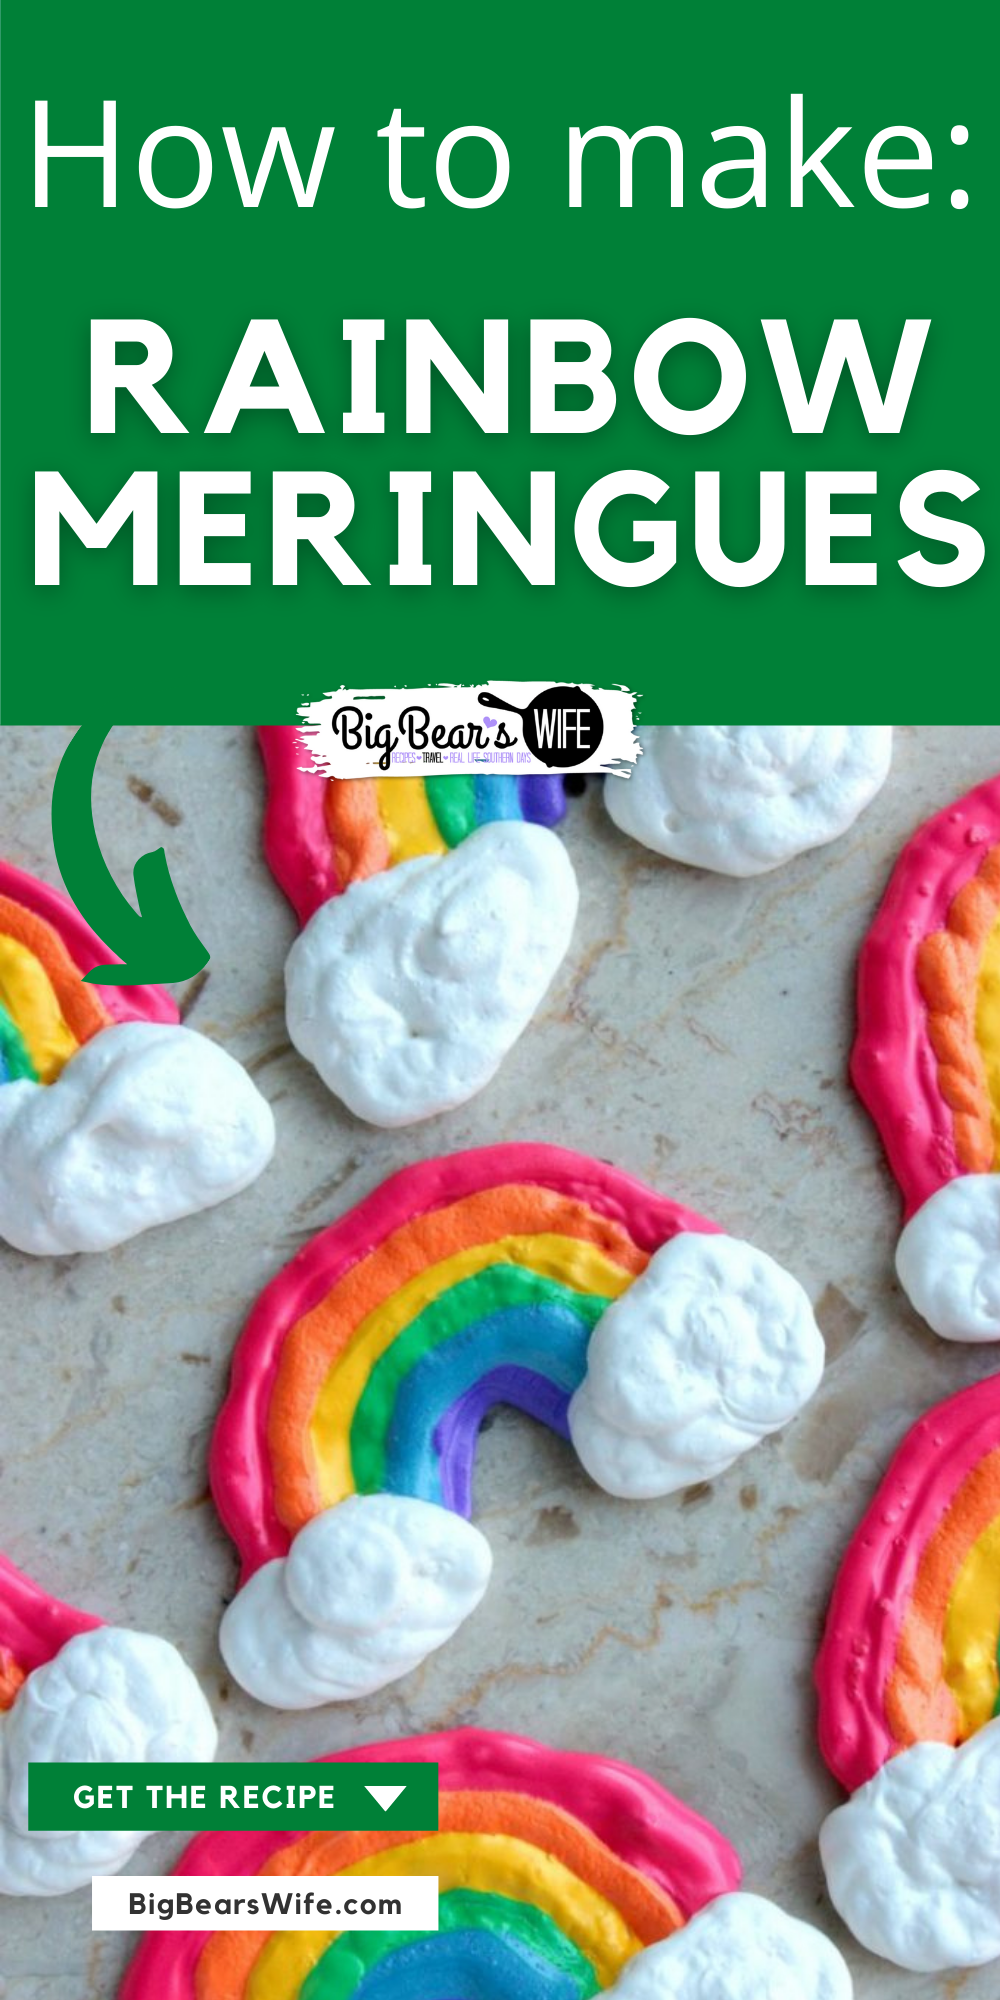 These Rainbow Meringues are light airy, crispy rainbow shaped cookies that are perfect for this weekend's St. Patrick's Day celebrations! via @bigbearswife